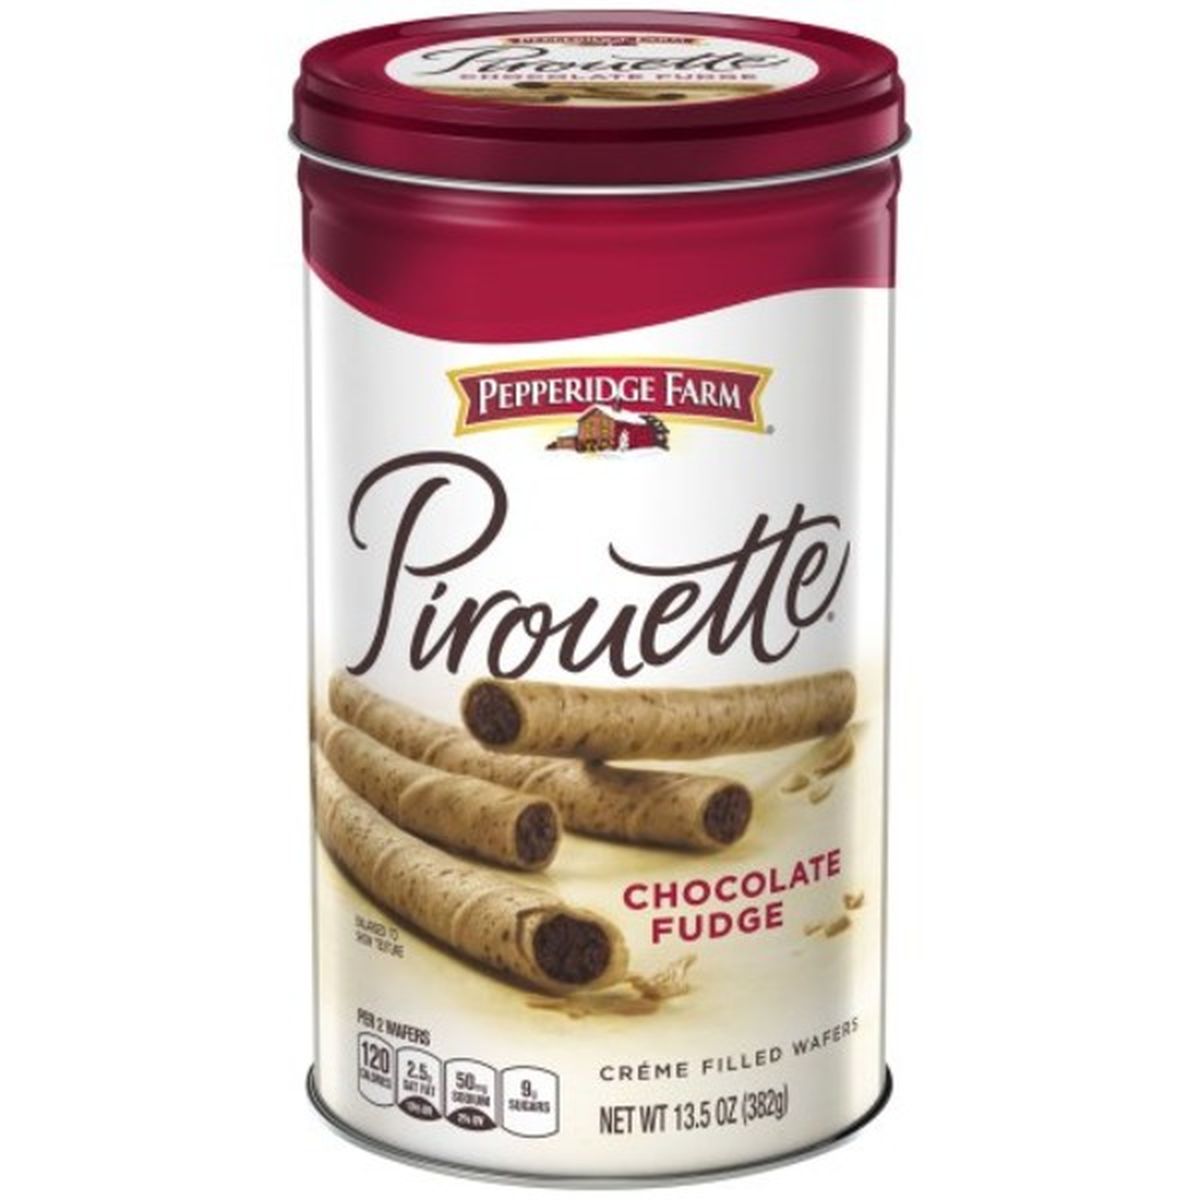 Calories in Pepperidge Farms  Pirouettes Pirouette Creme Filled Wafers Chocolate Fudge Cookies